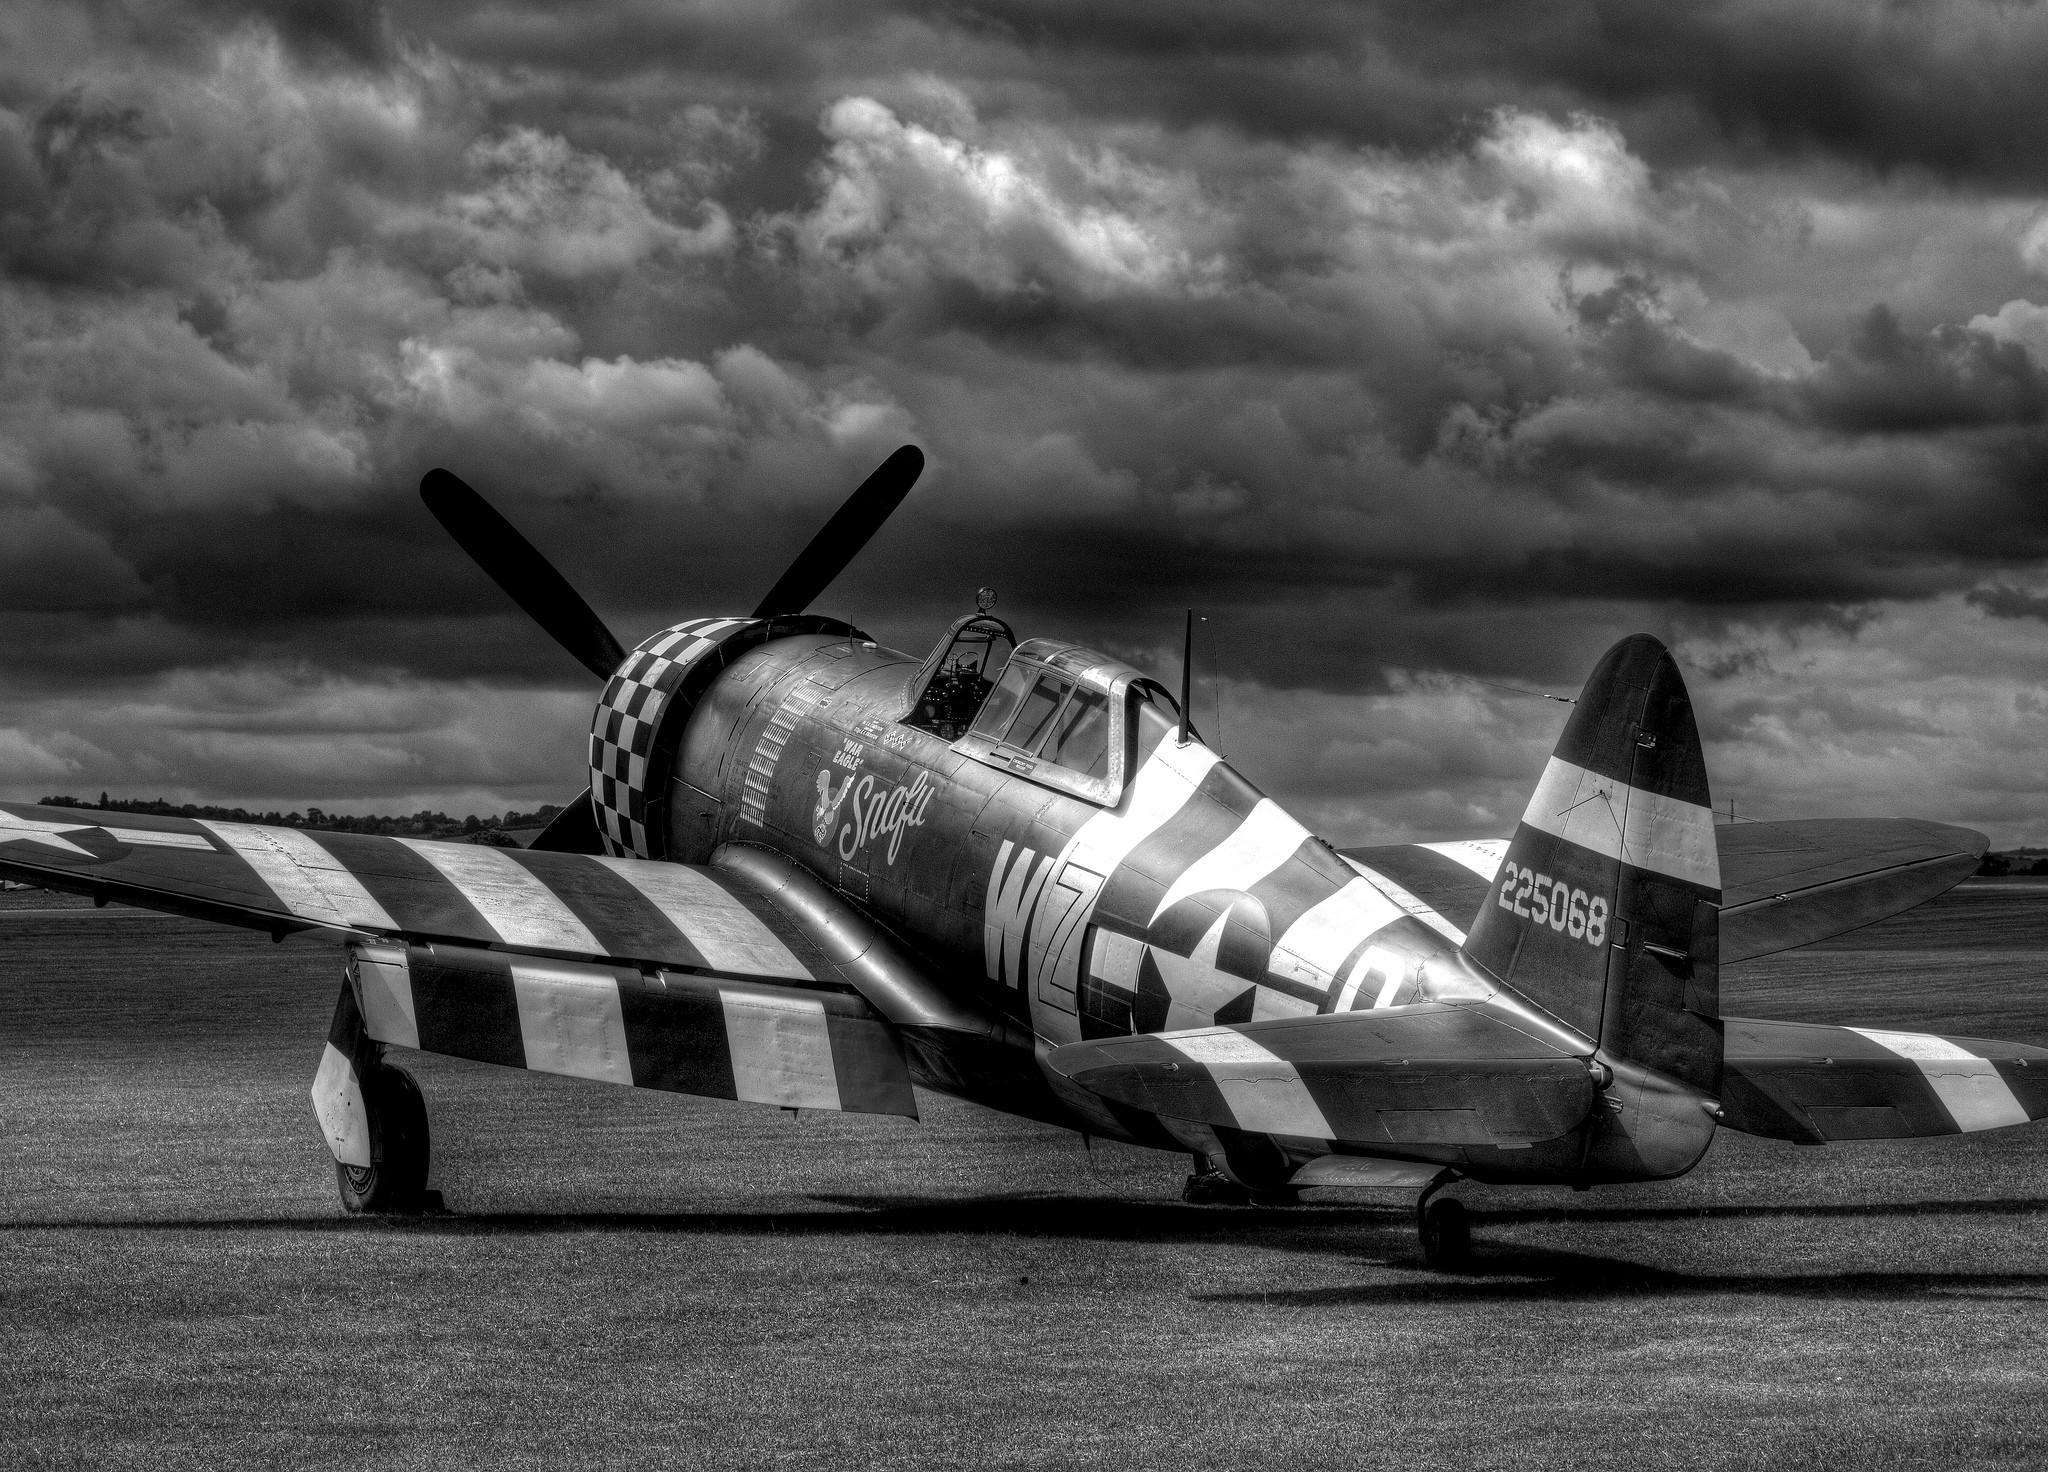 General 2048x1472 aircraft military Republic P-47 Thunderbolt vehicle monochrome numbers military aircraft American aircraft